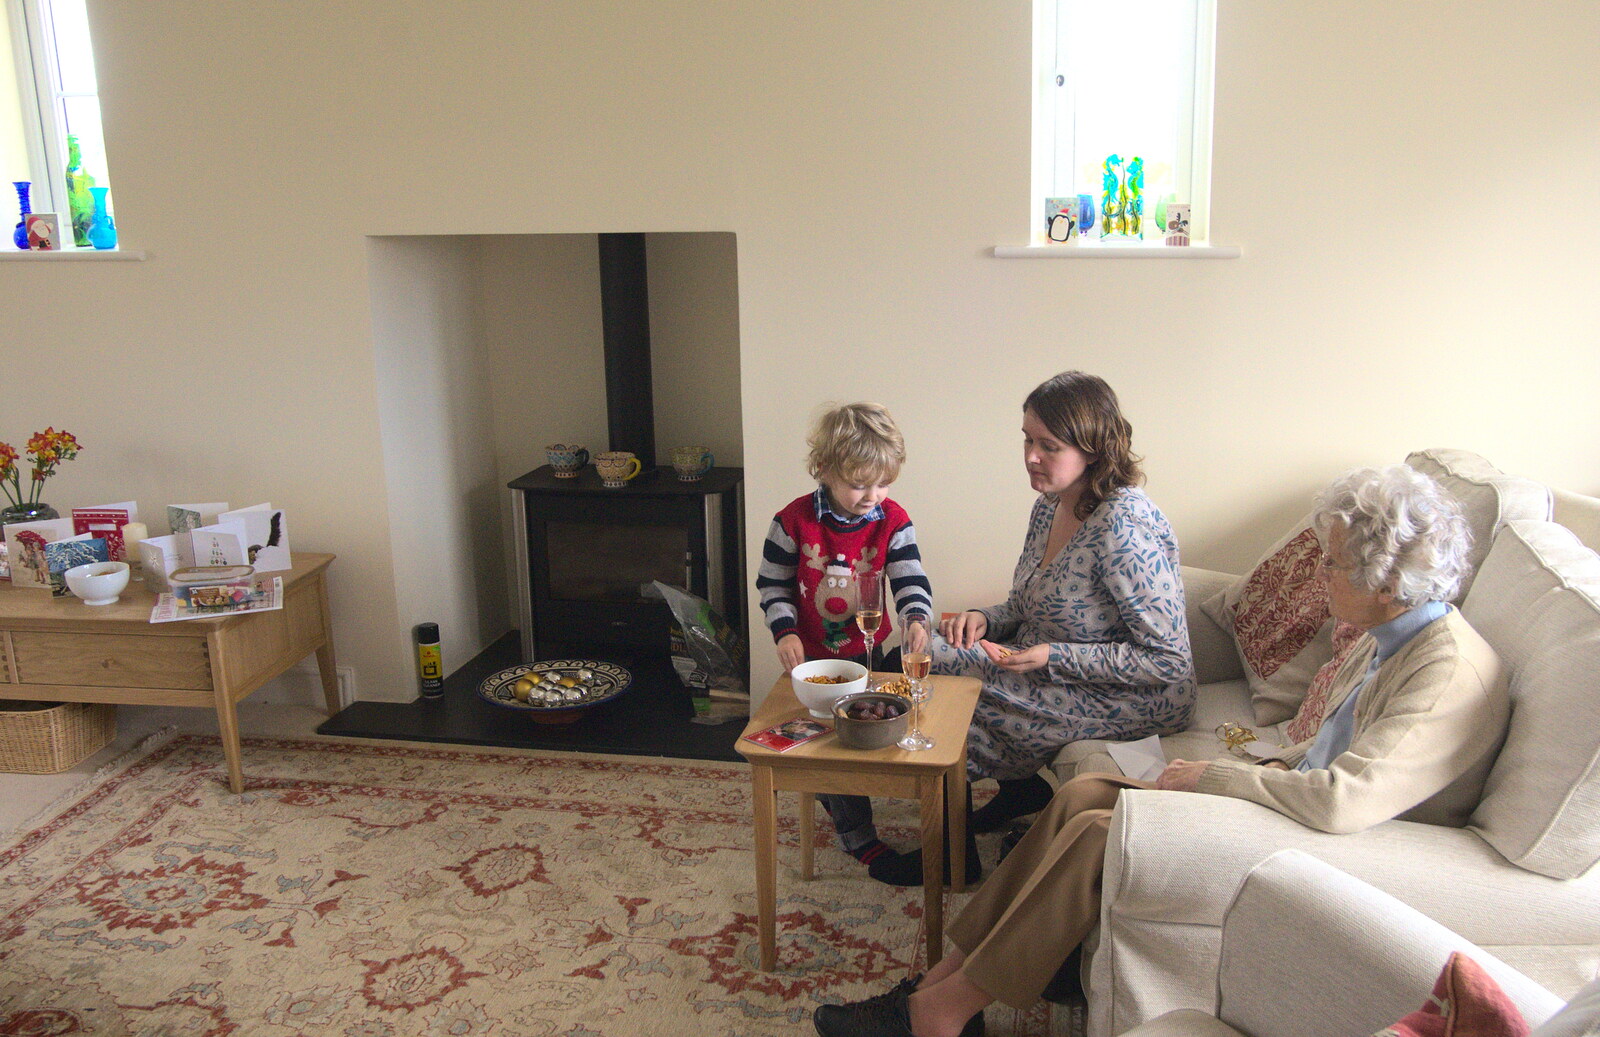 Fred, Isobel and Grandmother in the lounge from Christmas Day in Spreyton, Devon - 25th December 2012